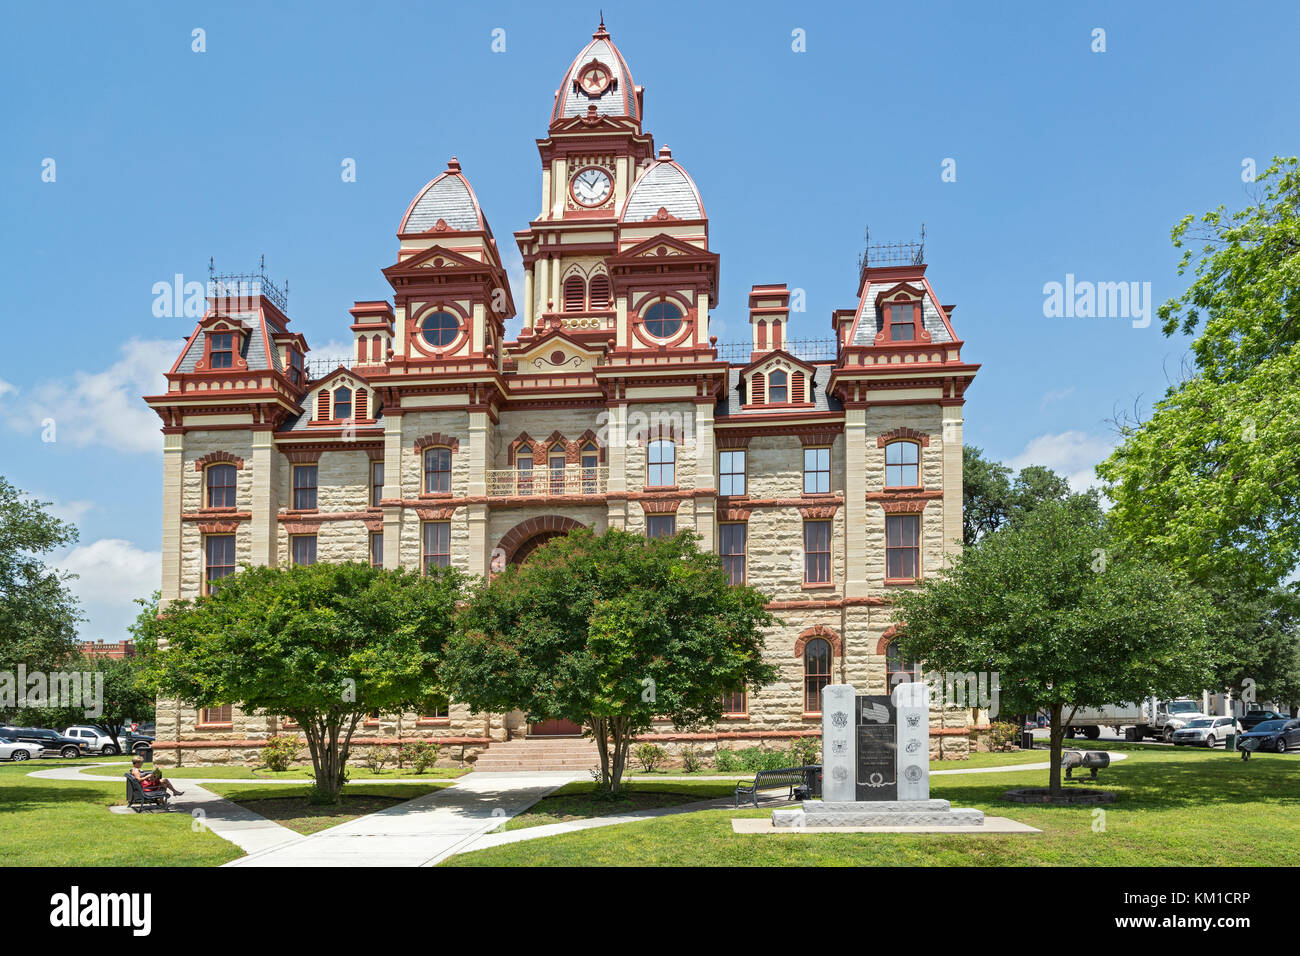 Texas, Lockhart, Caldwell County Courthouse, construit 1894 Banque D'Images